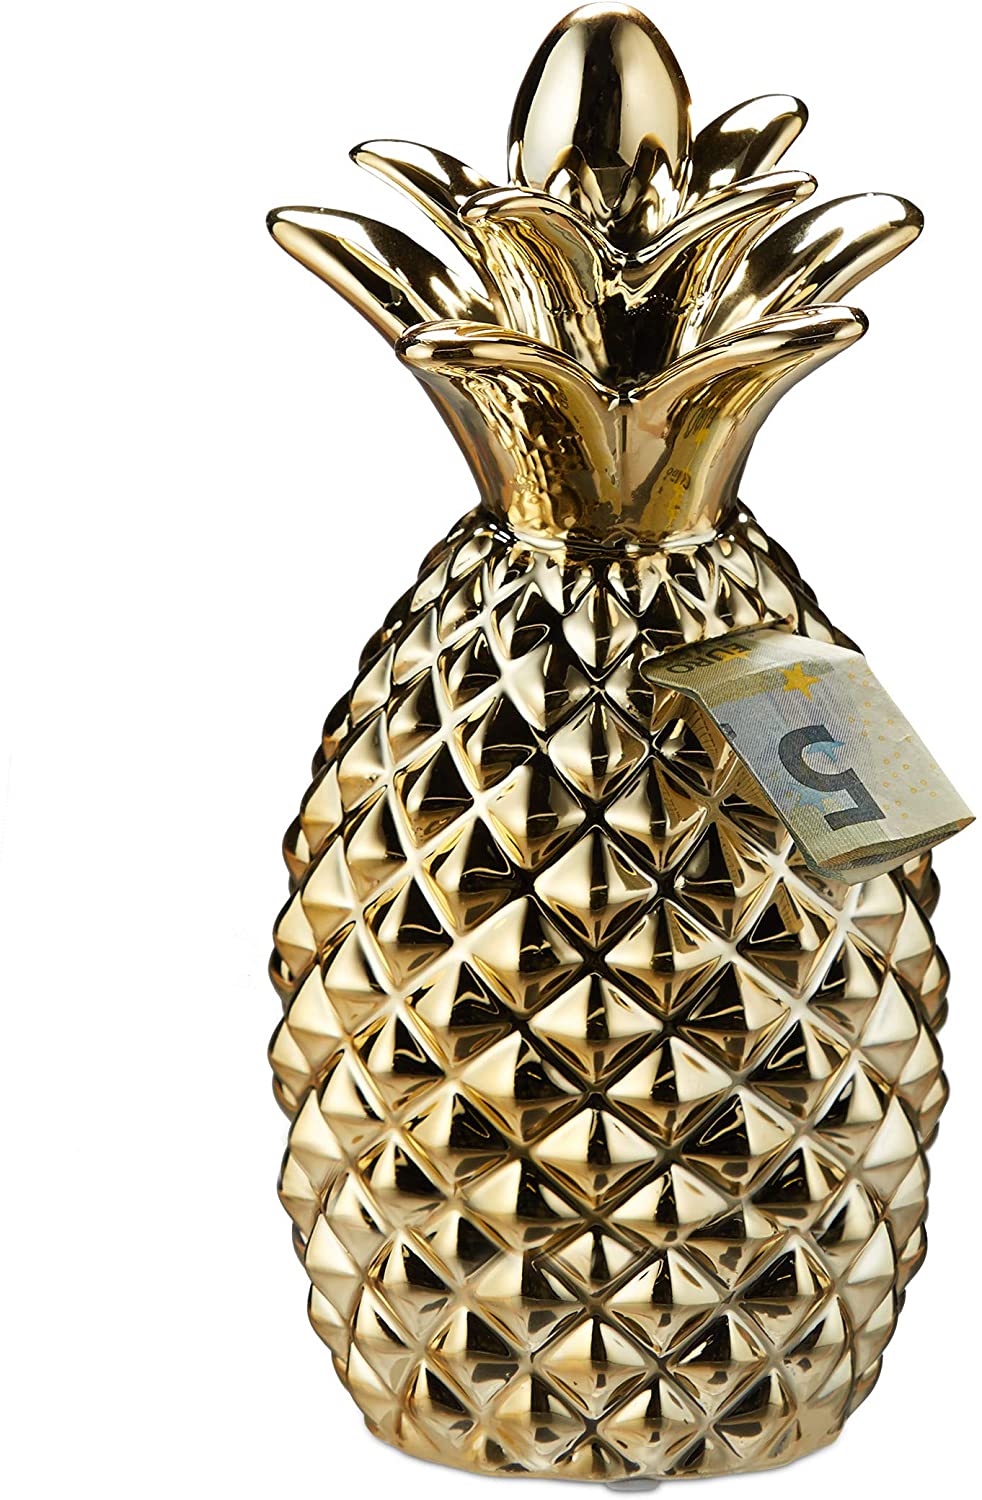 Relaxdays Money Box In Trendy Design Coins & Notes Decorative Pineapple Hxd